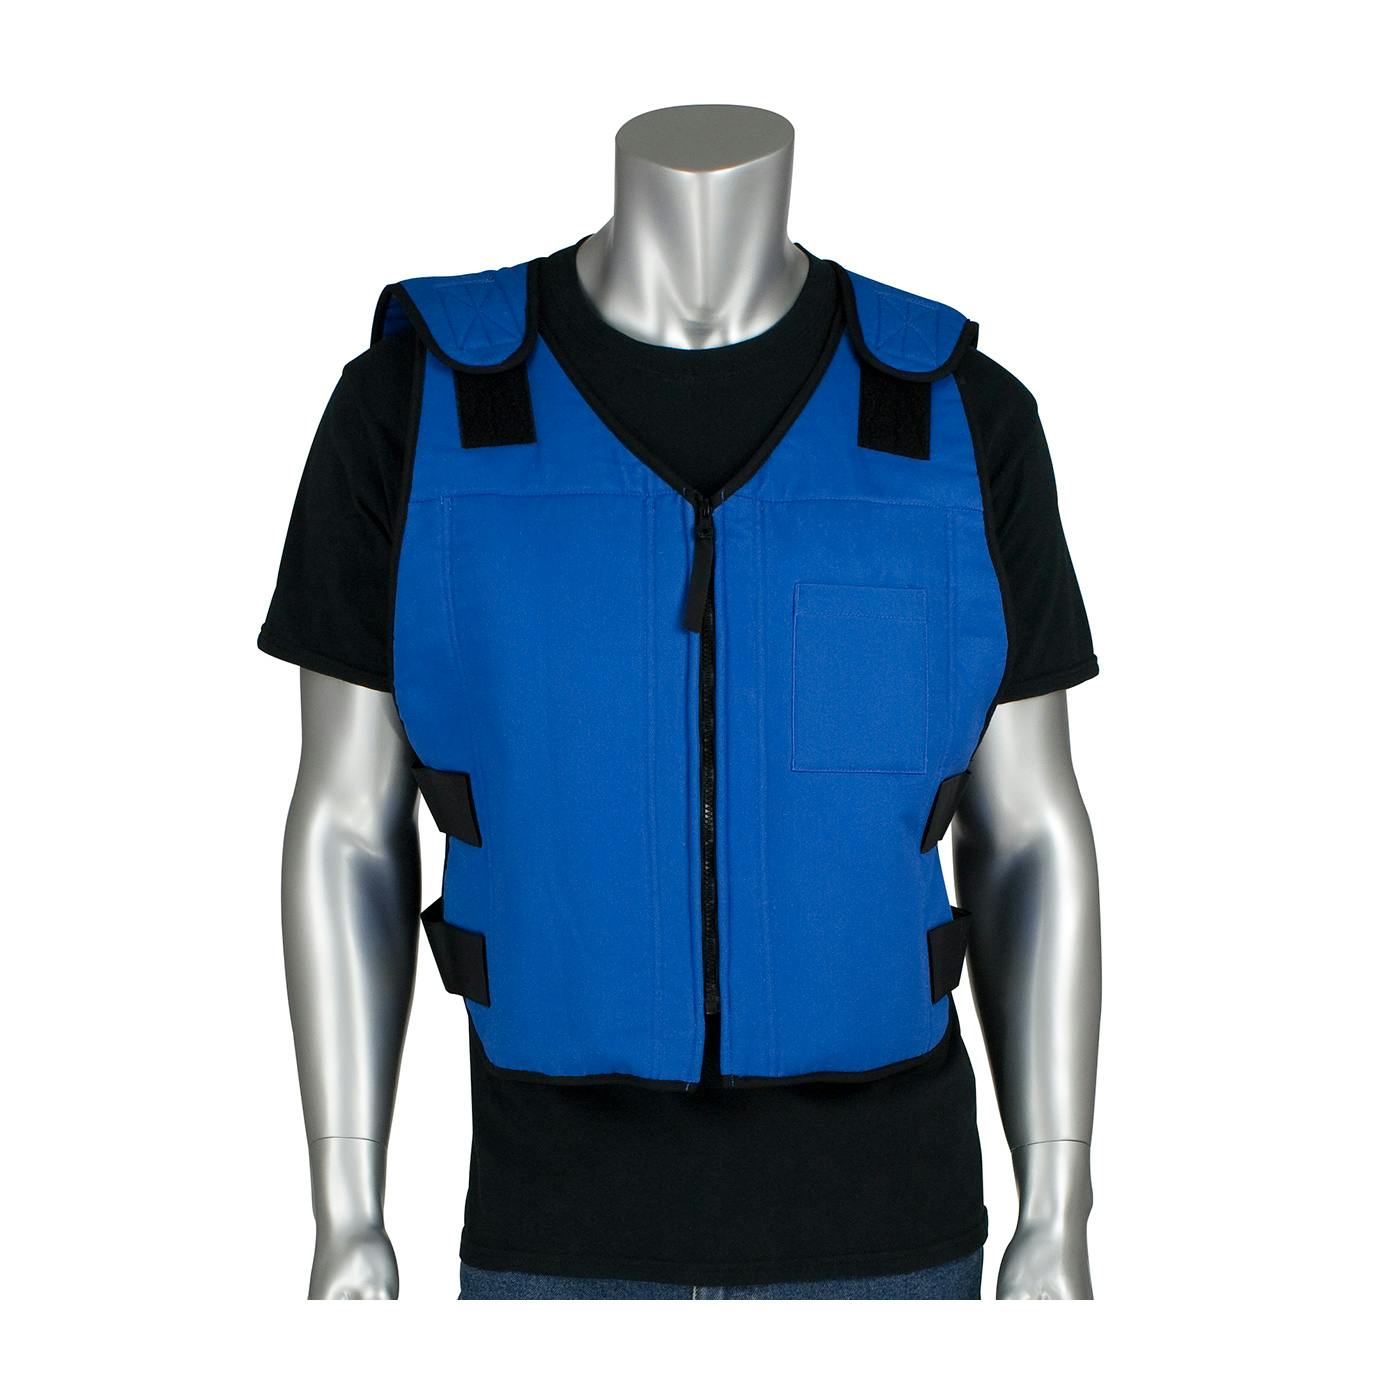 Premium Phase Change Active Fit Cooling Vest with Insulated Cooler Bag, Blue (390-EZSPC)